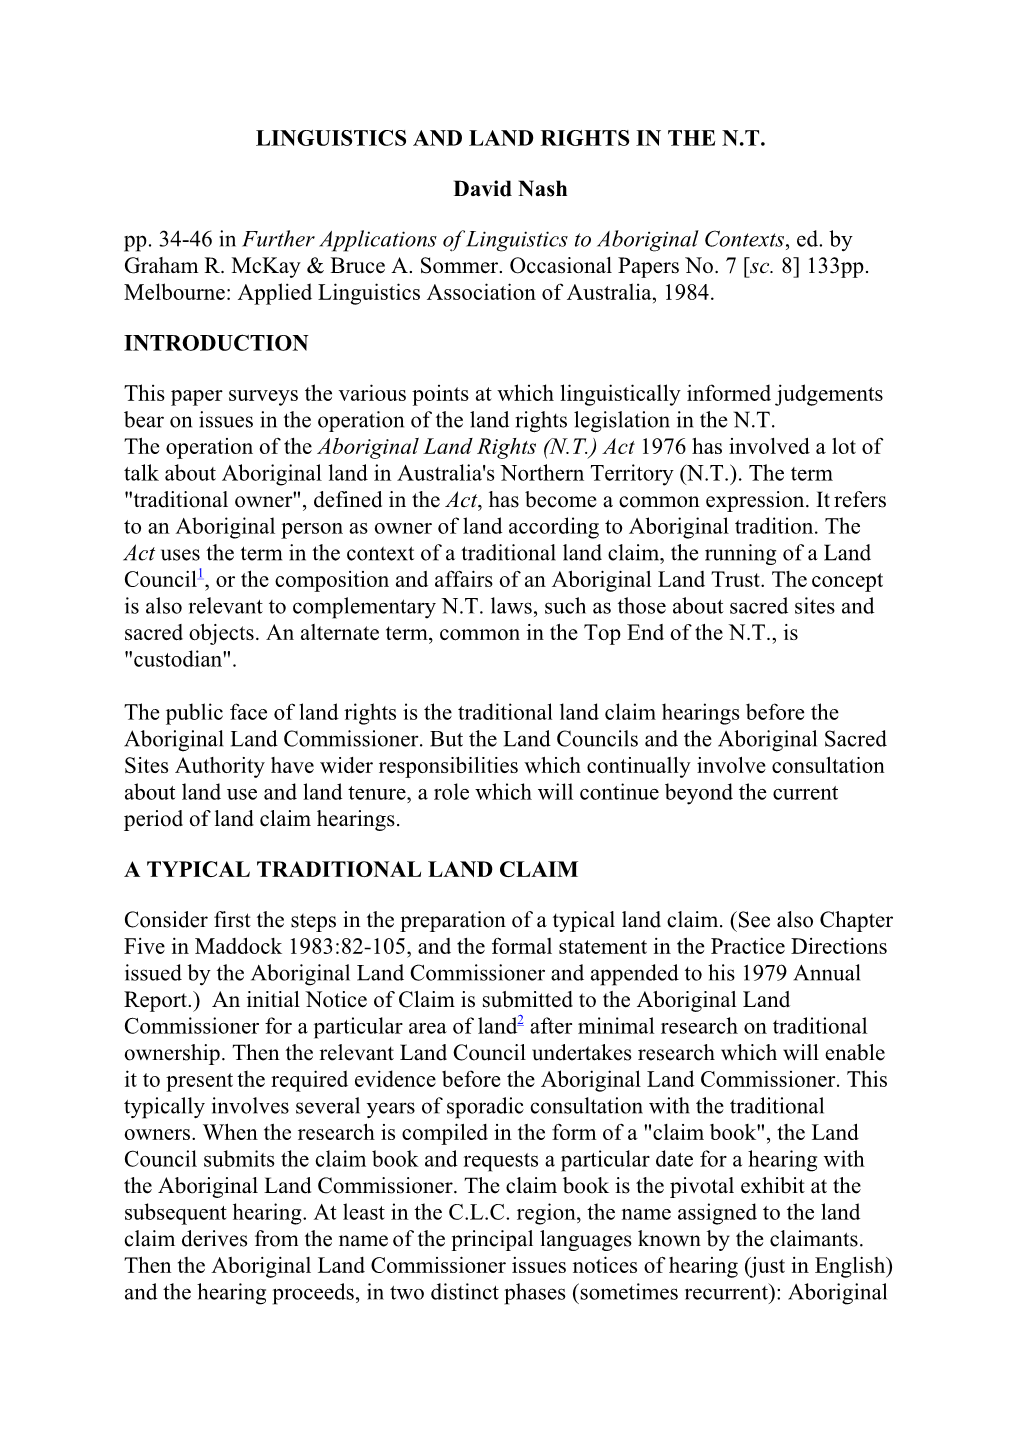 Nash Linguistics and Land Rights in NT, 1984, Rev. 1999